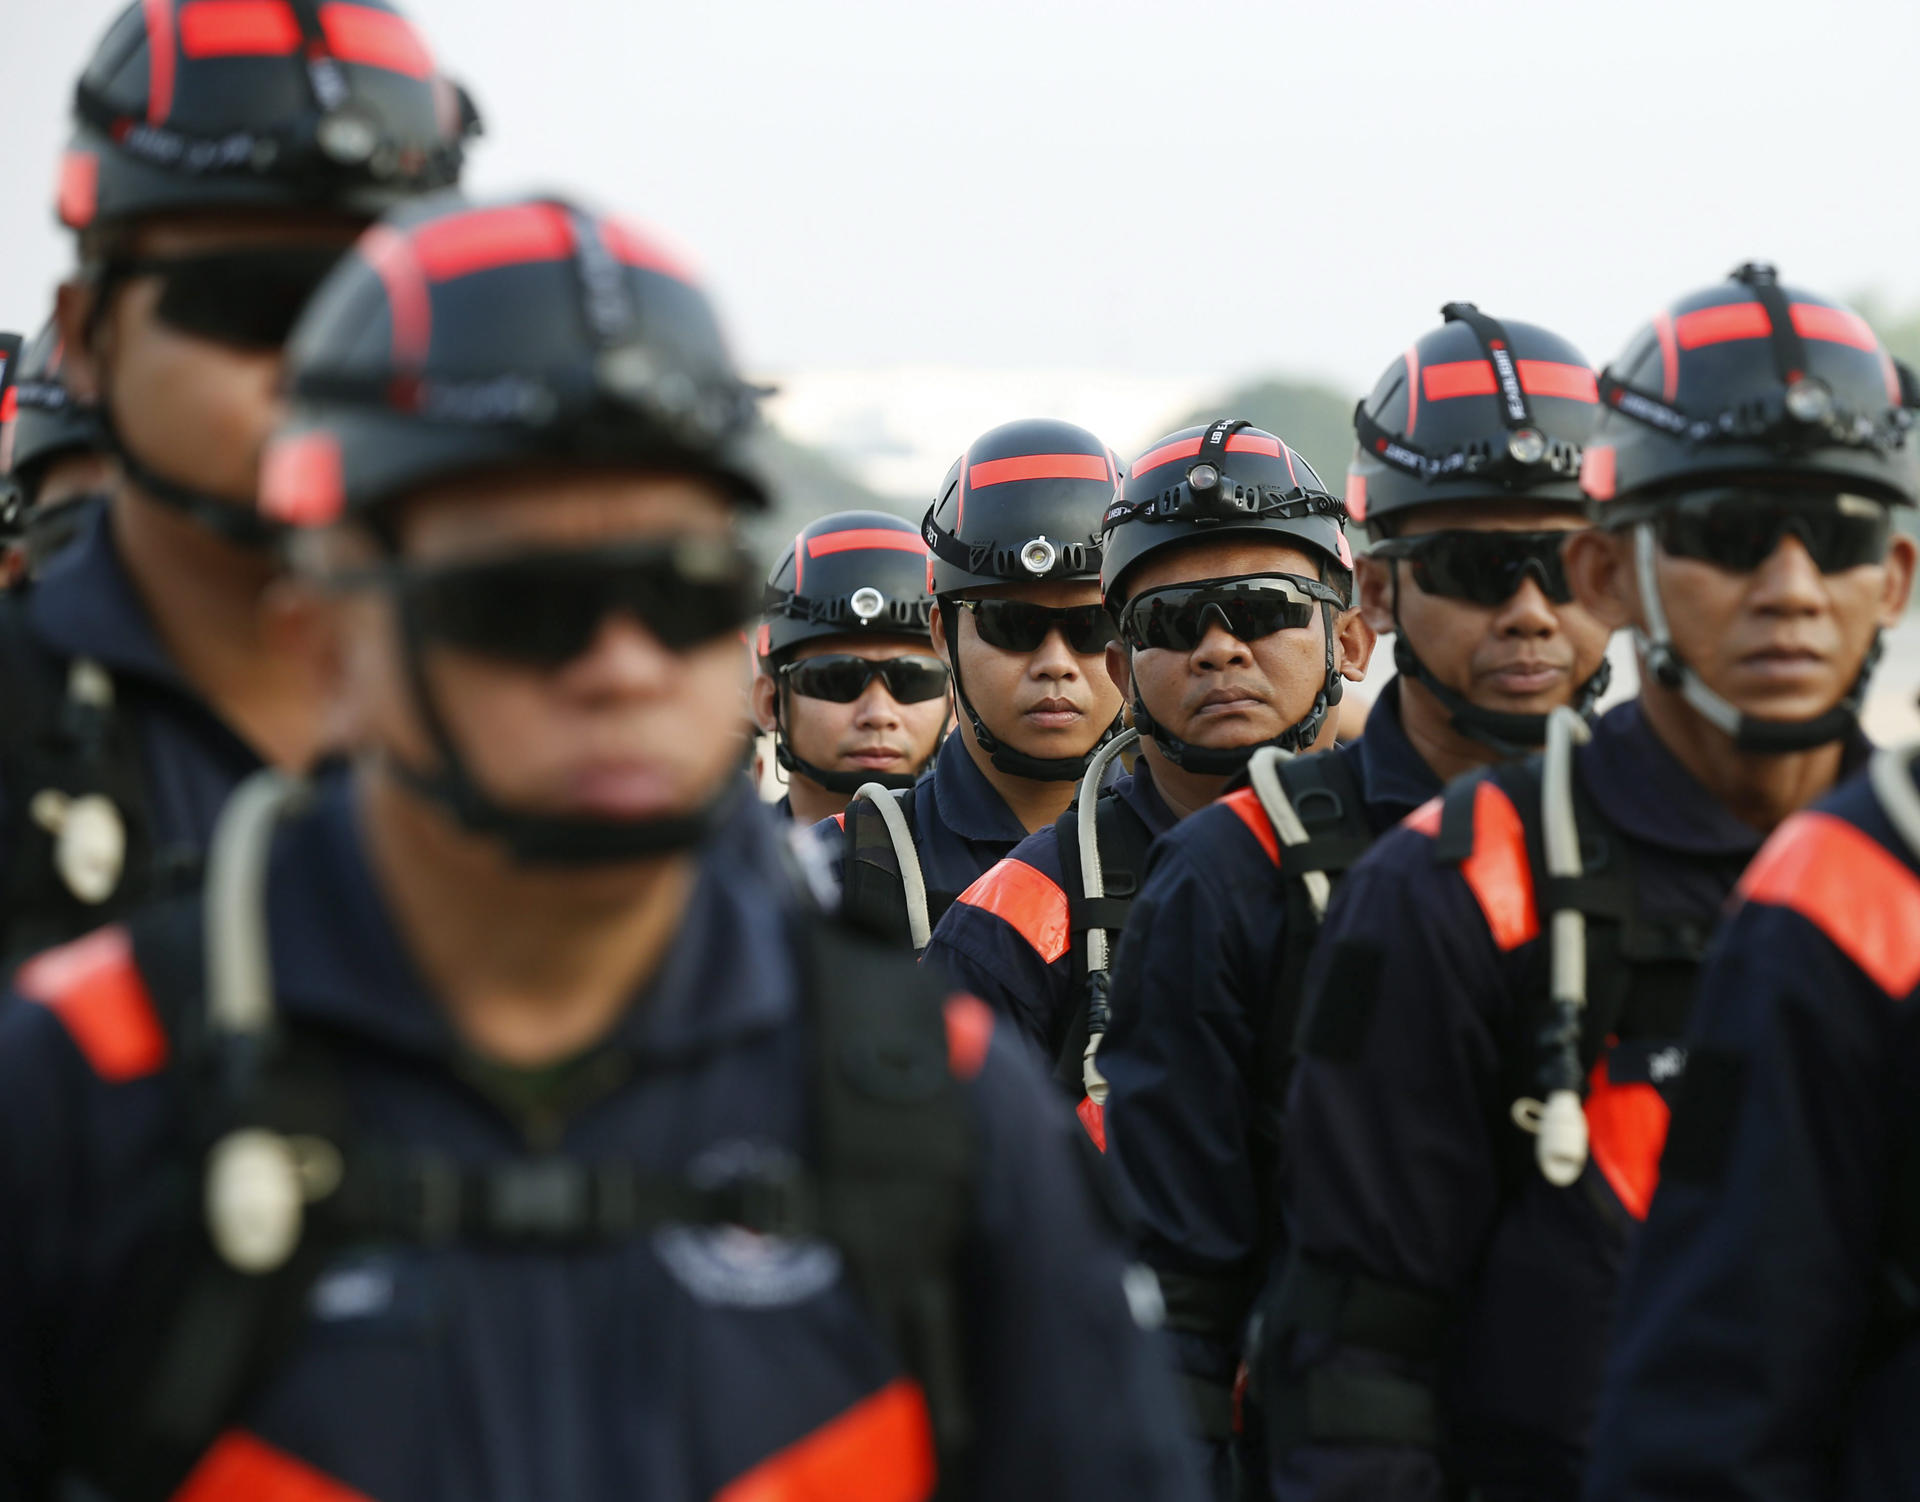 A file picture shows members of a rescue team of the Royal Thai Armed Forces in Bangkok, Thailand. EPA/EFE/FILE/NARONG SANGNAK